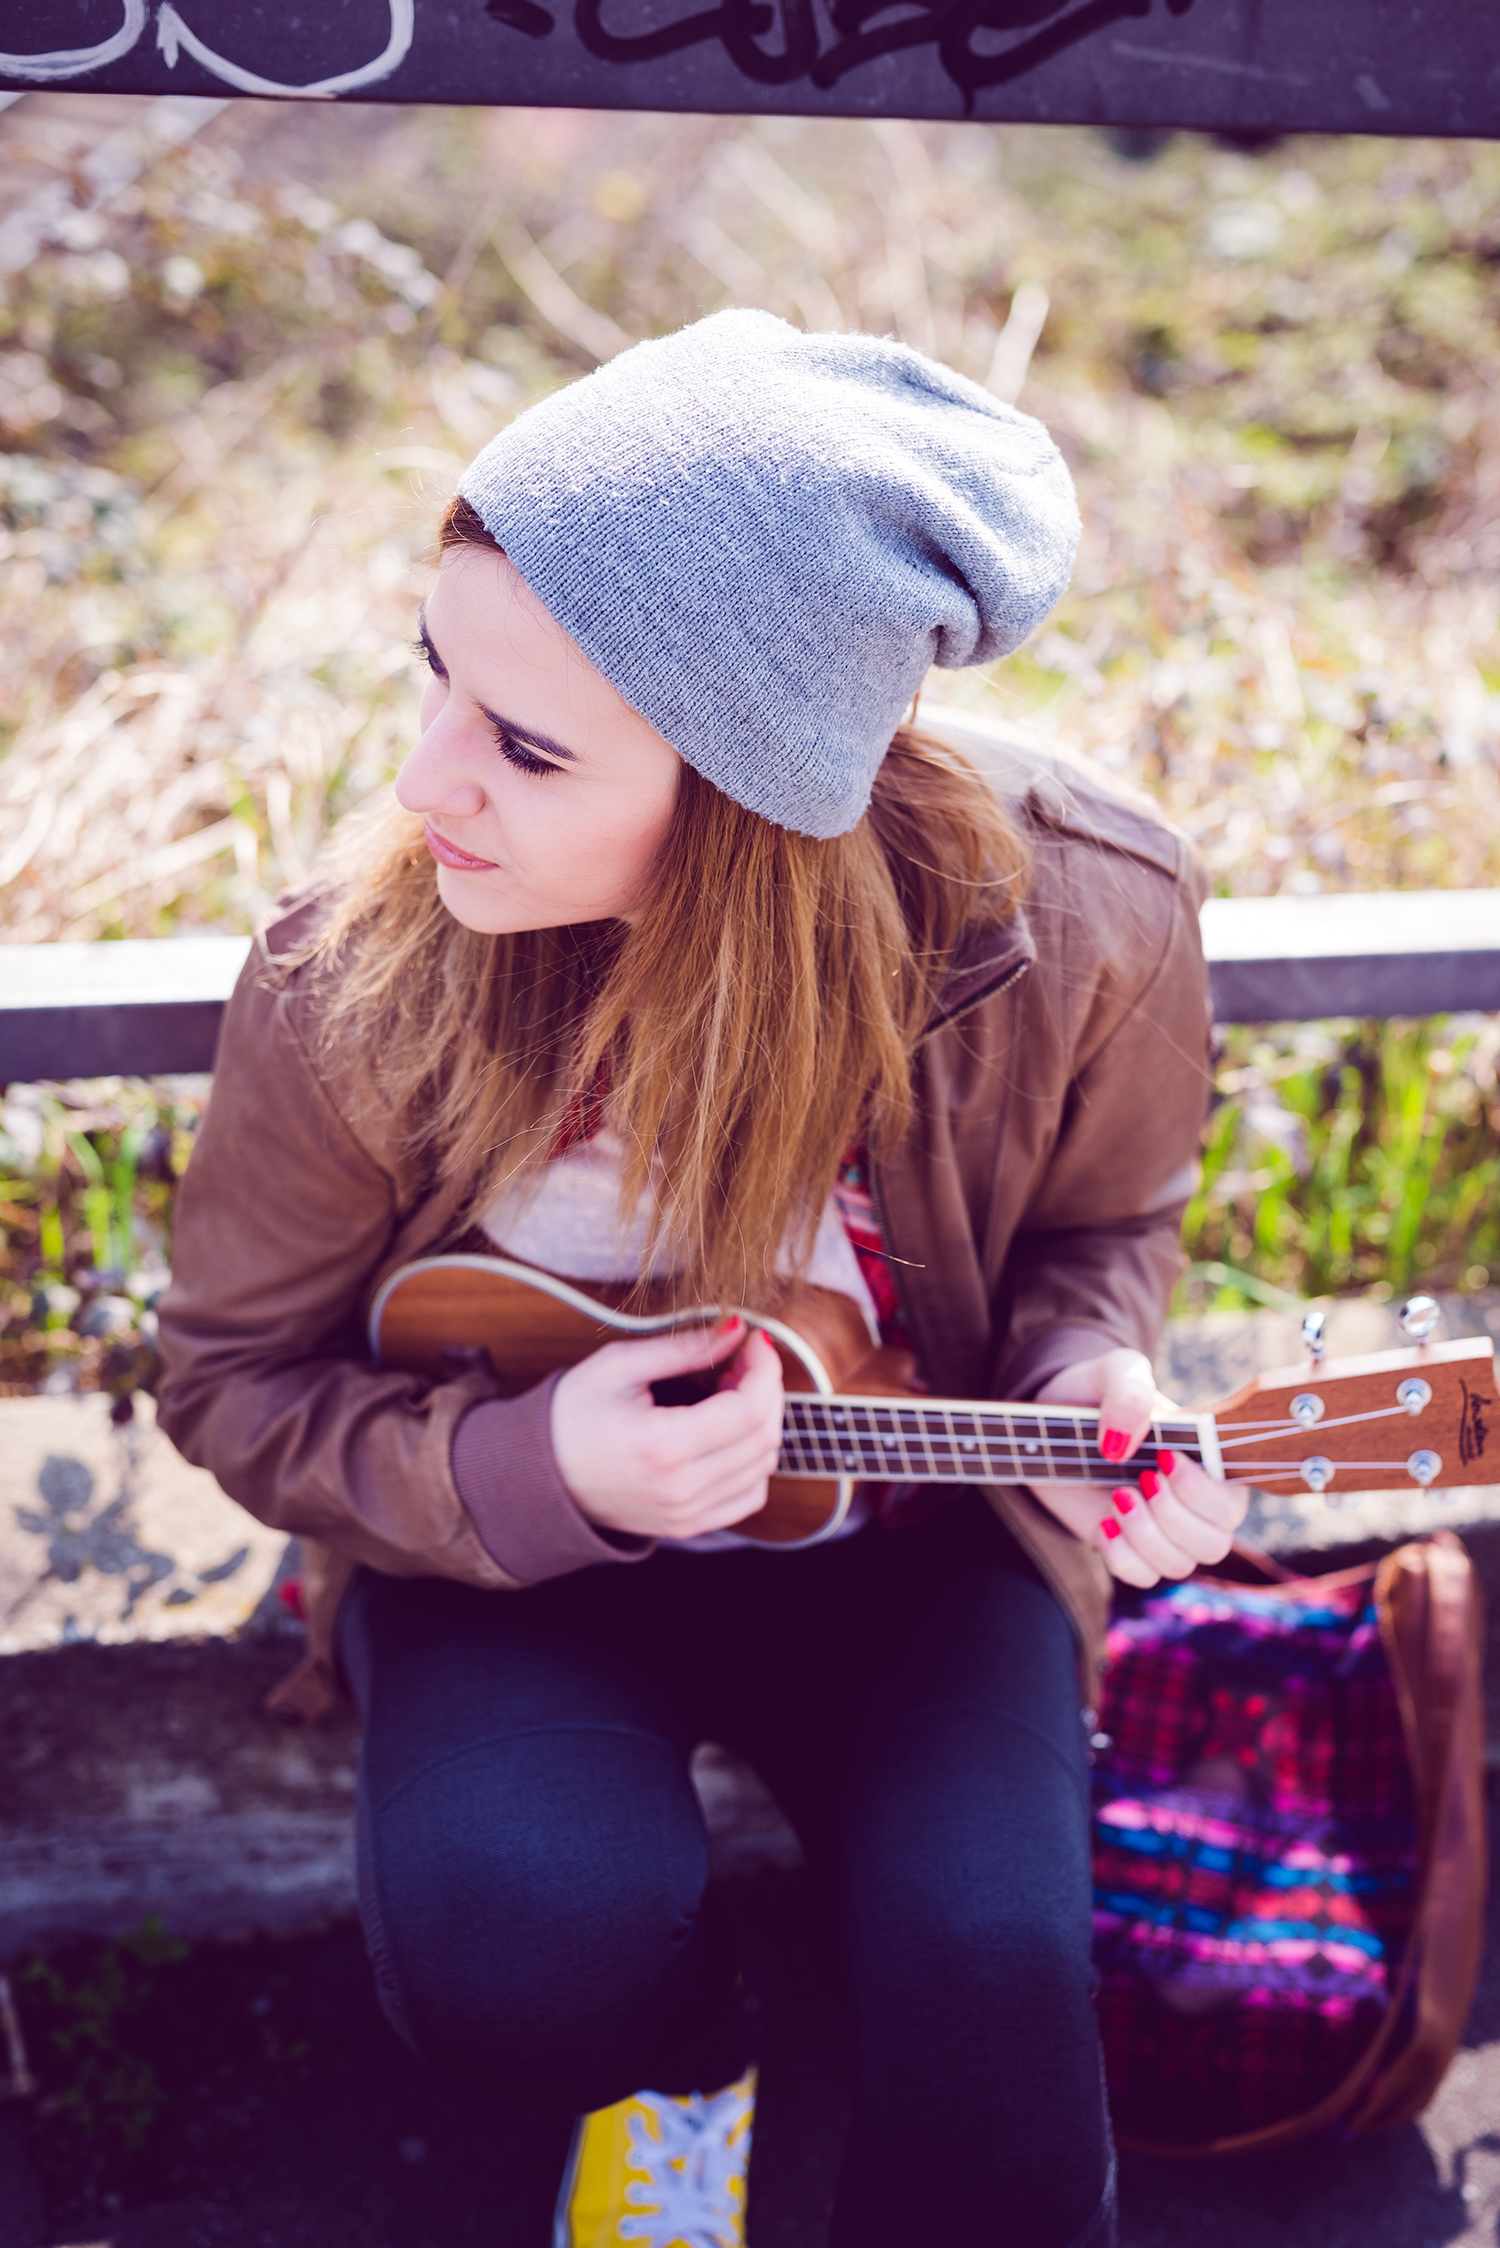 young beautiful blonde hipster woman in the city playing ukulele